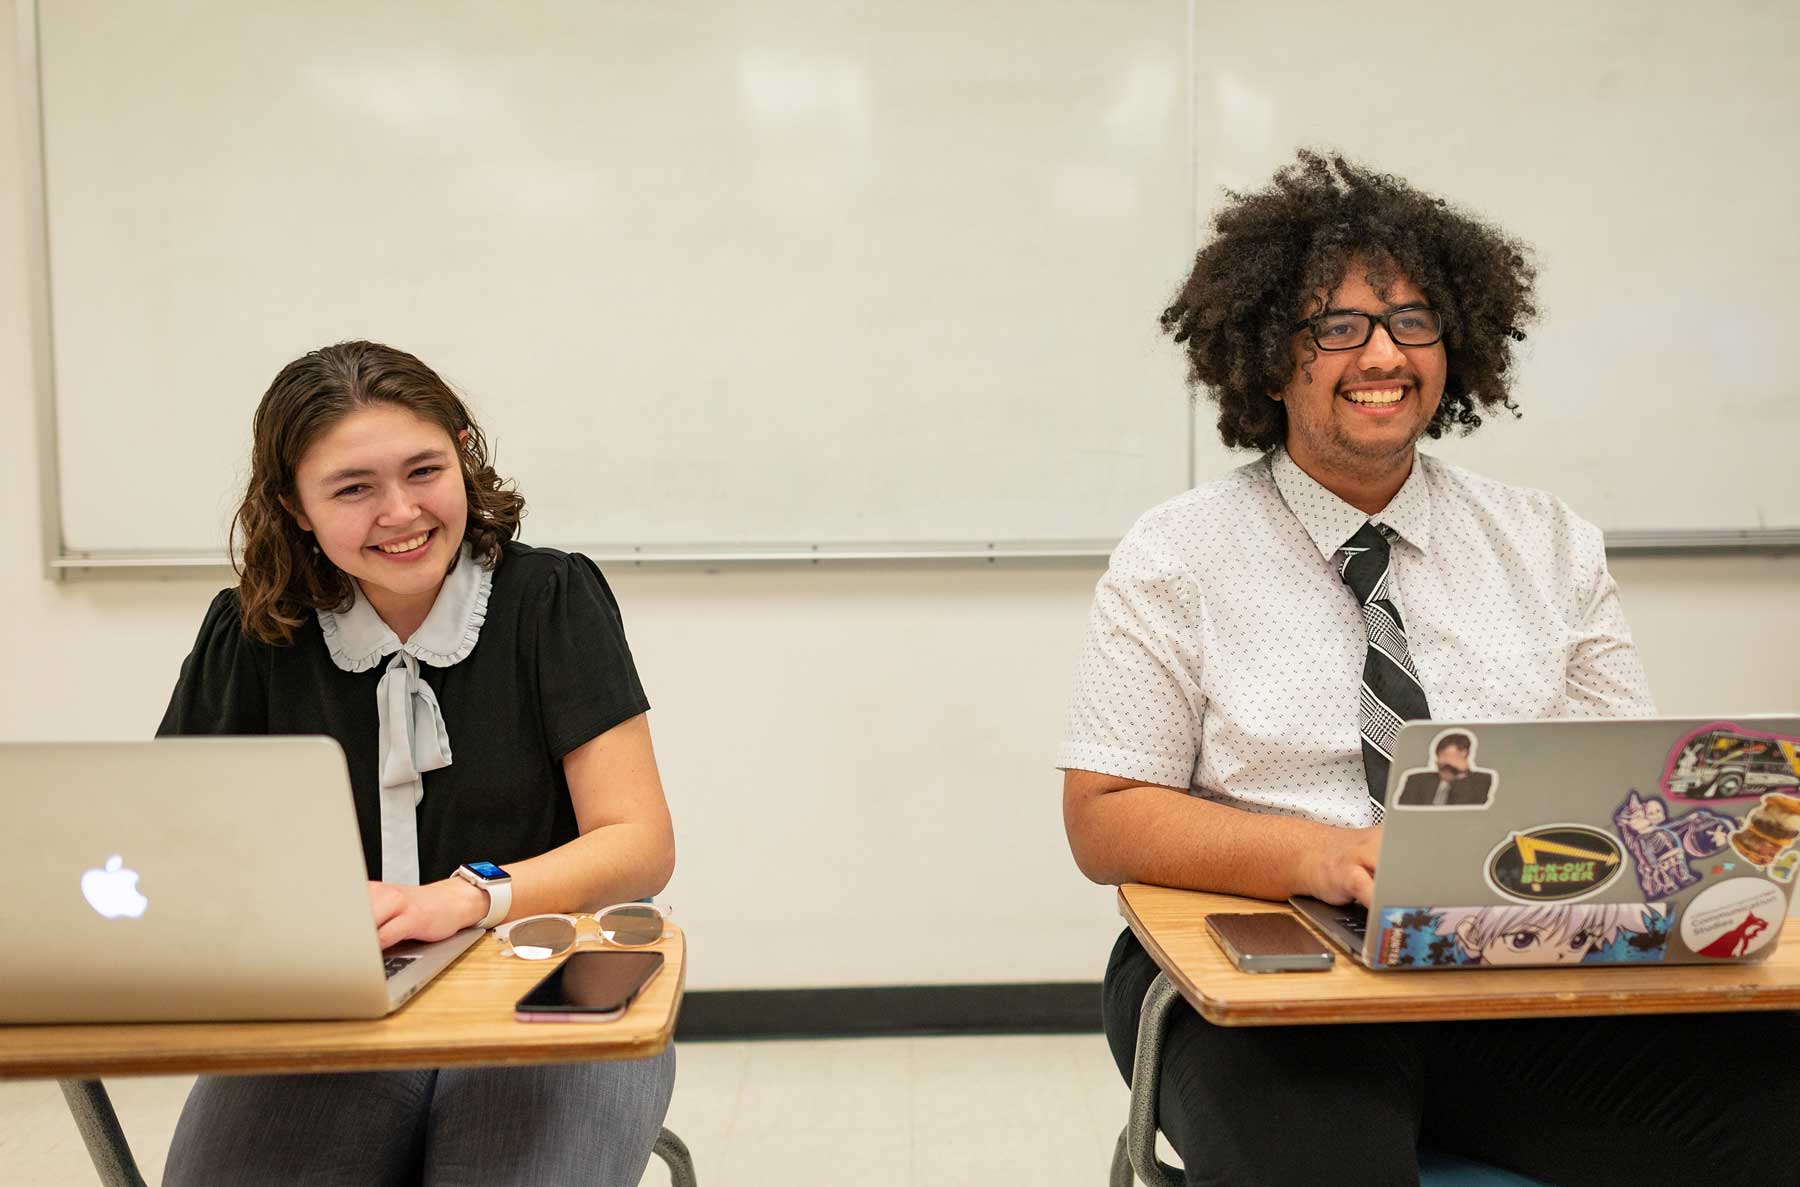 Marin Spalding, left, and Marcus Peoples, on the right, sit side-by-side in a classroom with laptops opened in front of them. Both are dressed in formal clothing, smiling widely and clearly amused.